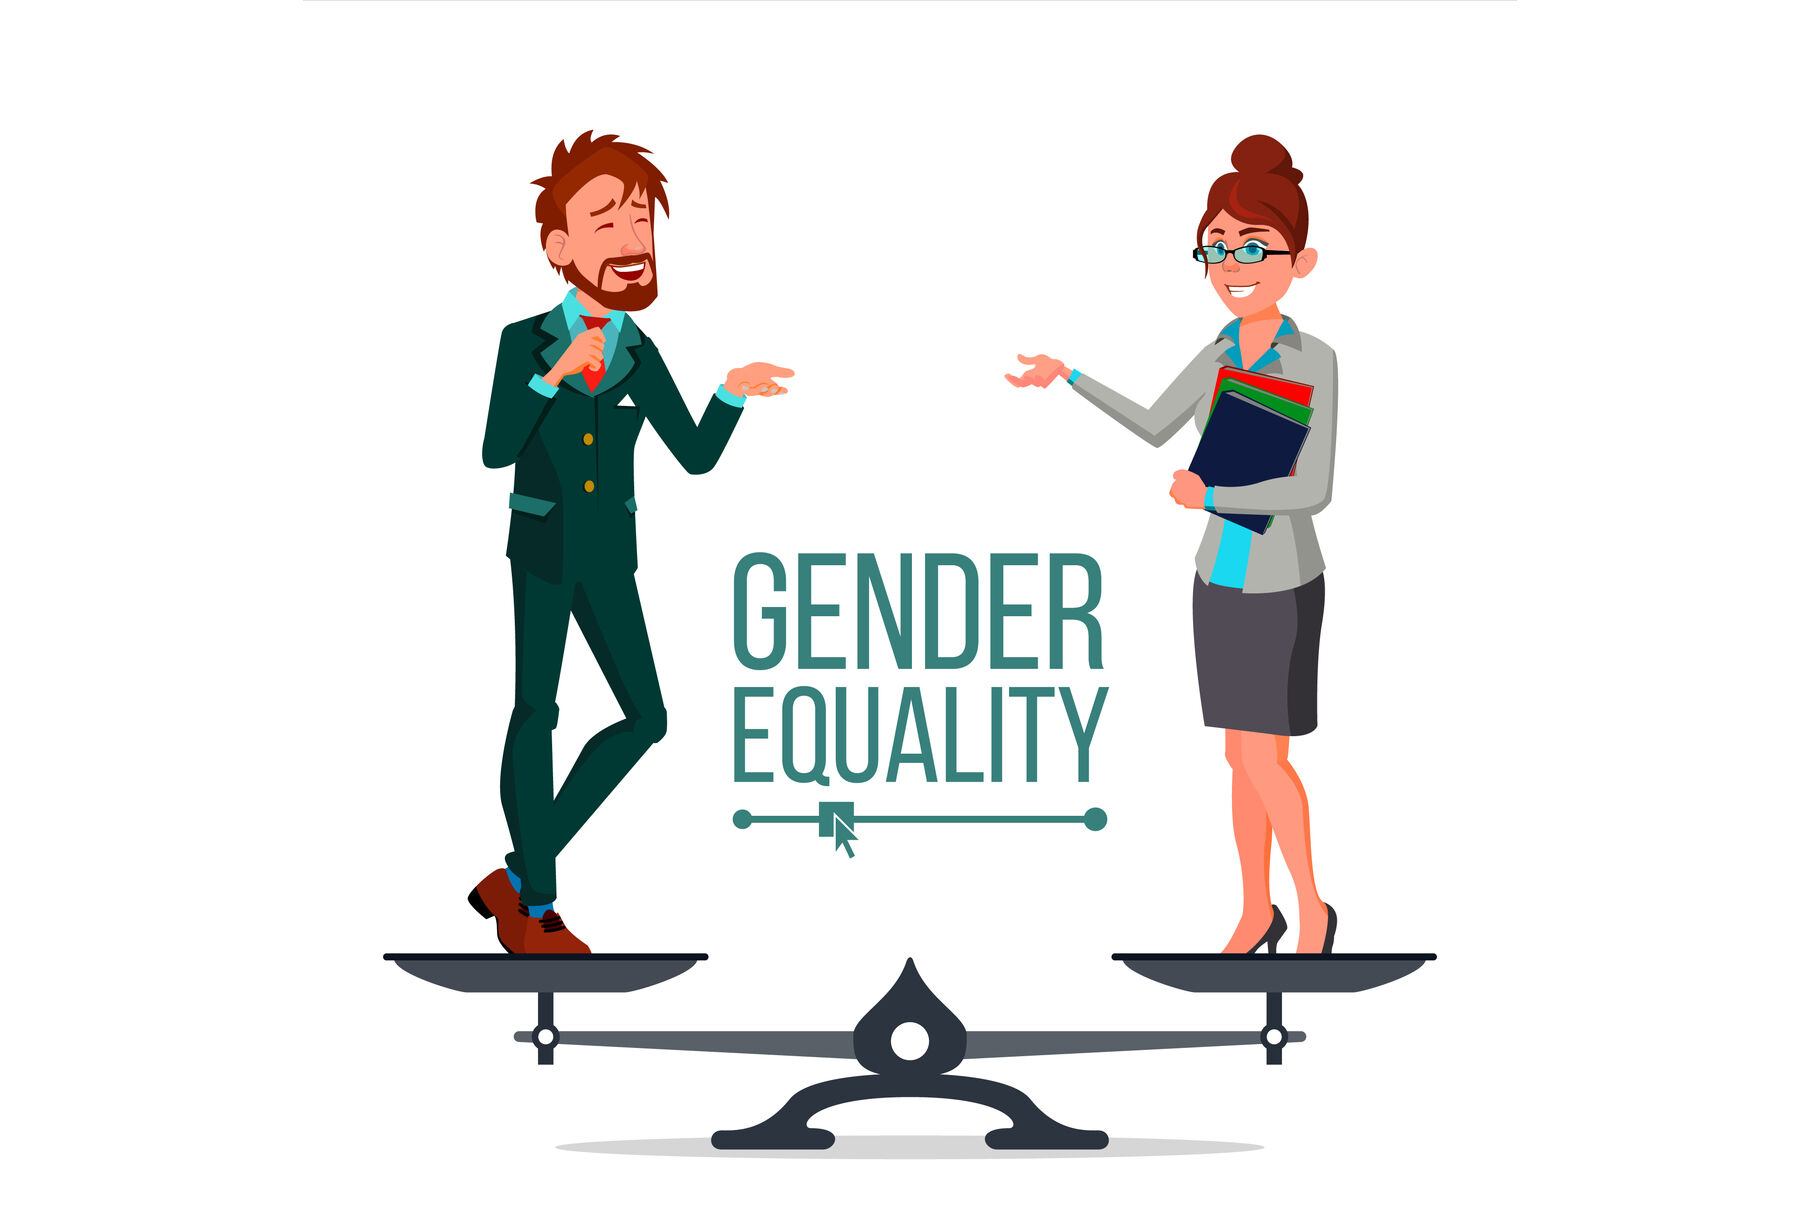 Gender Equality Vector. Man And Woman. Standing On Scales. Equal Rights